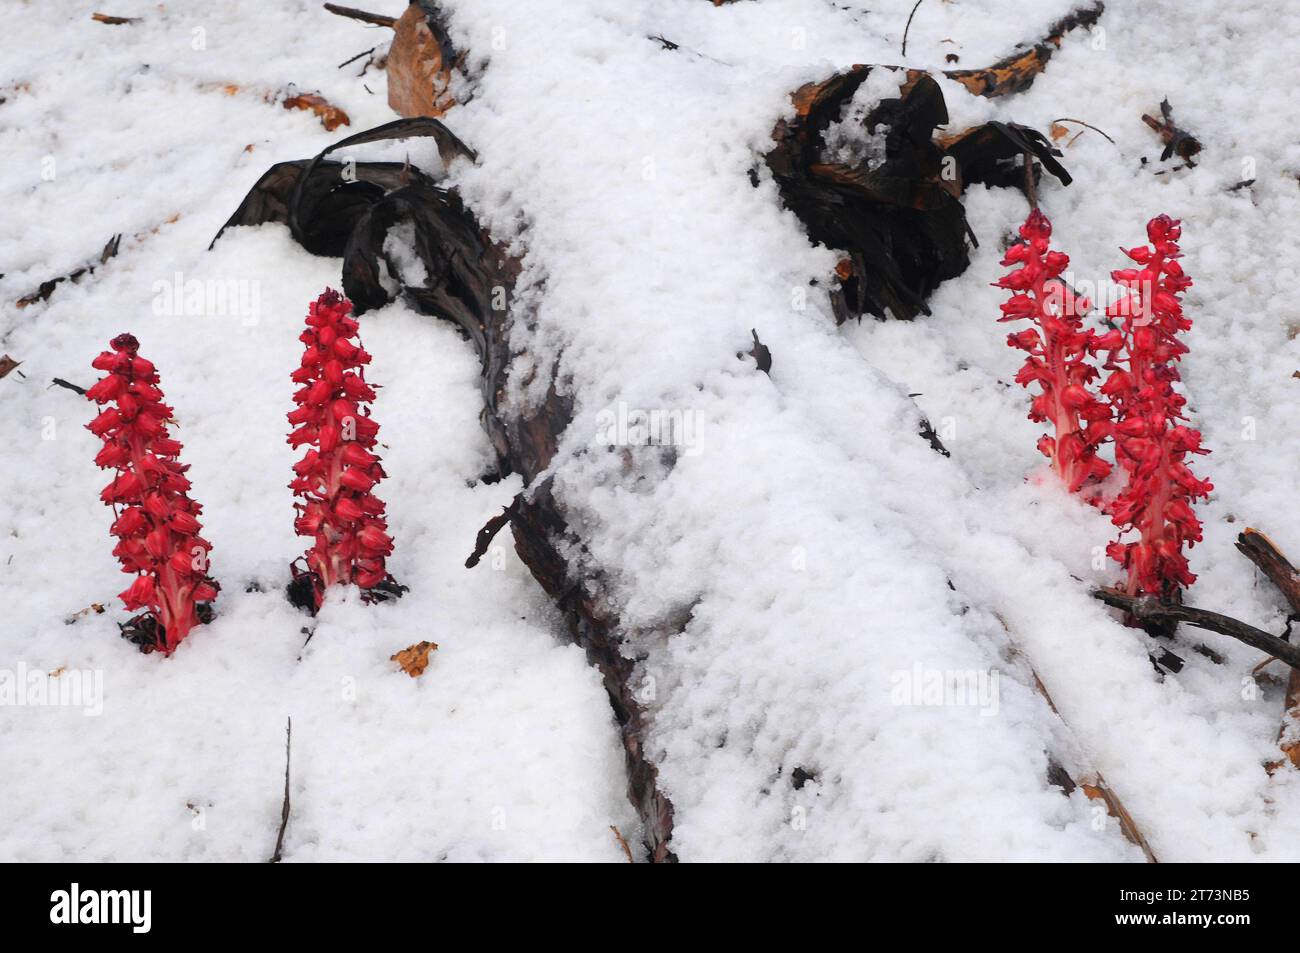 Snow plant or snow flower (Sarcodes sanguinea) is a parasitic plant native to coniferous forest of California. This photo was taken in Sequoia Nationa Stock Photo